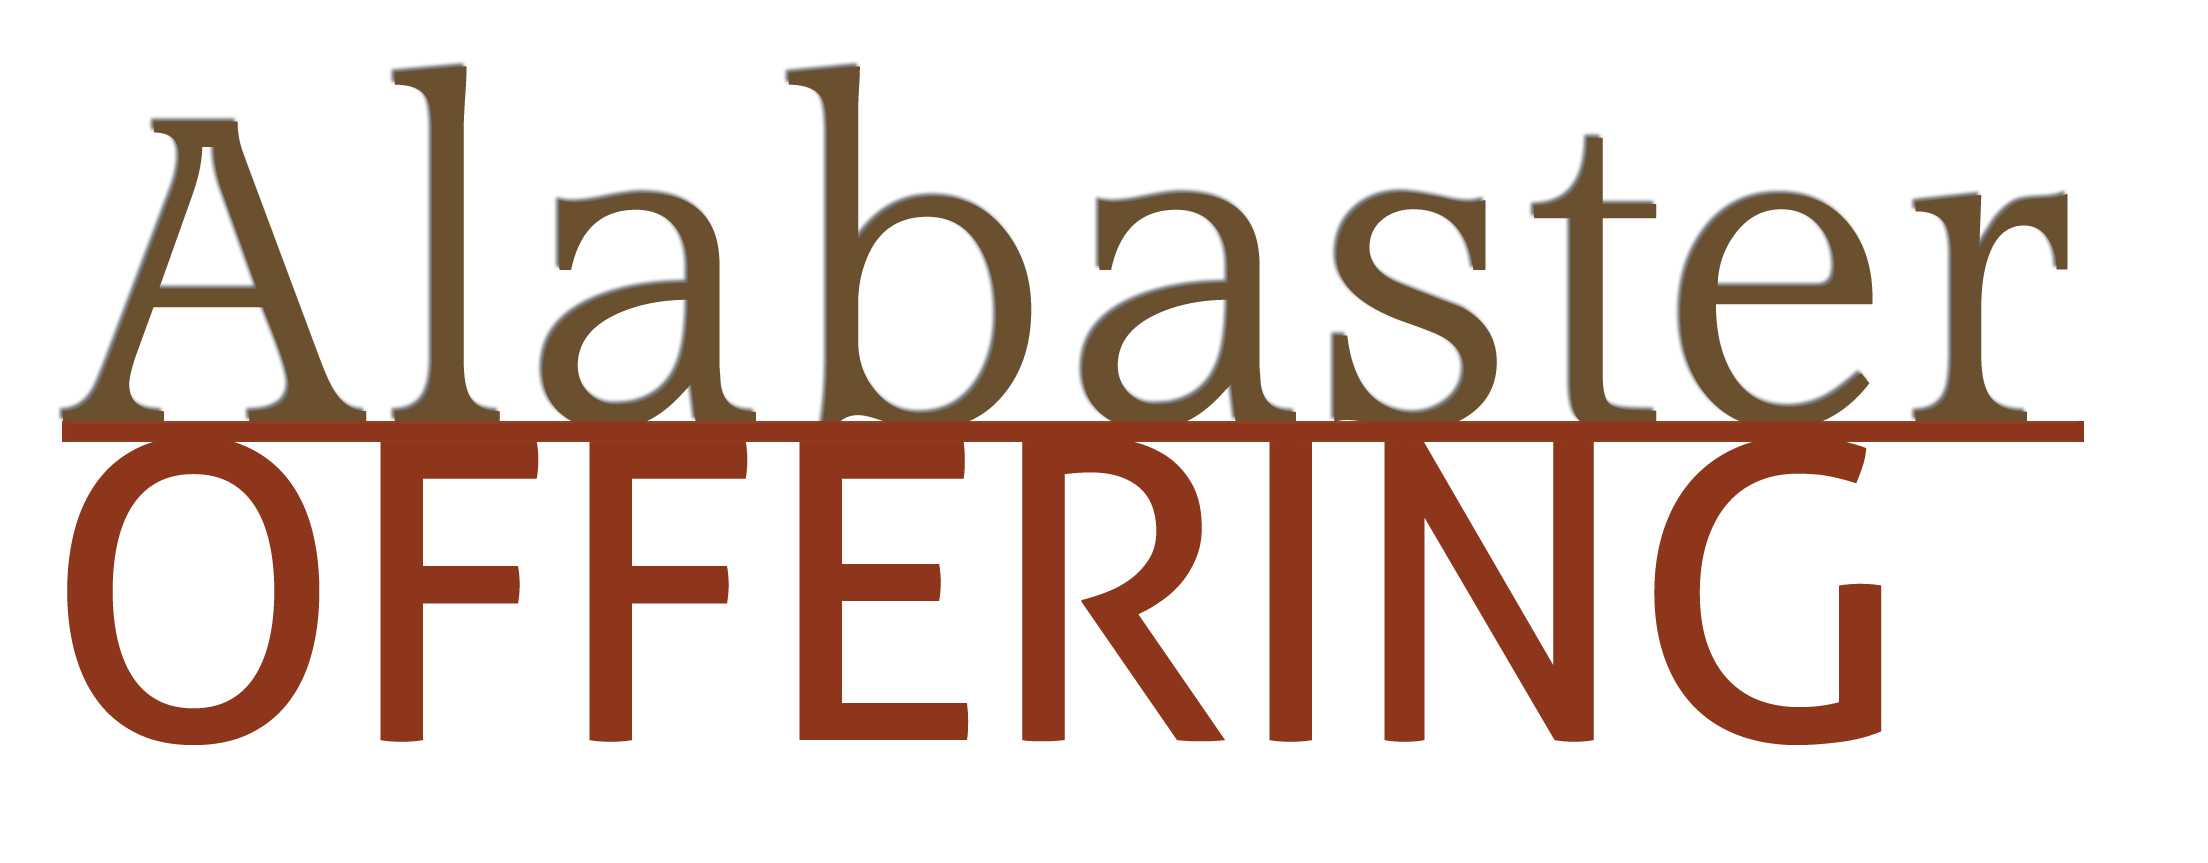 Details for Alabaster Offering 2021 and Related Queries